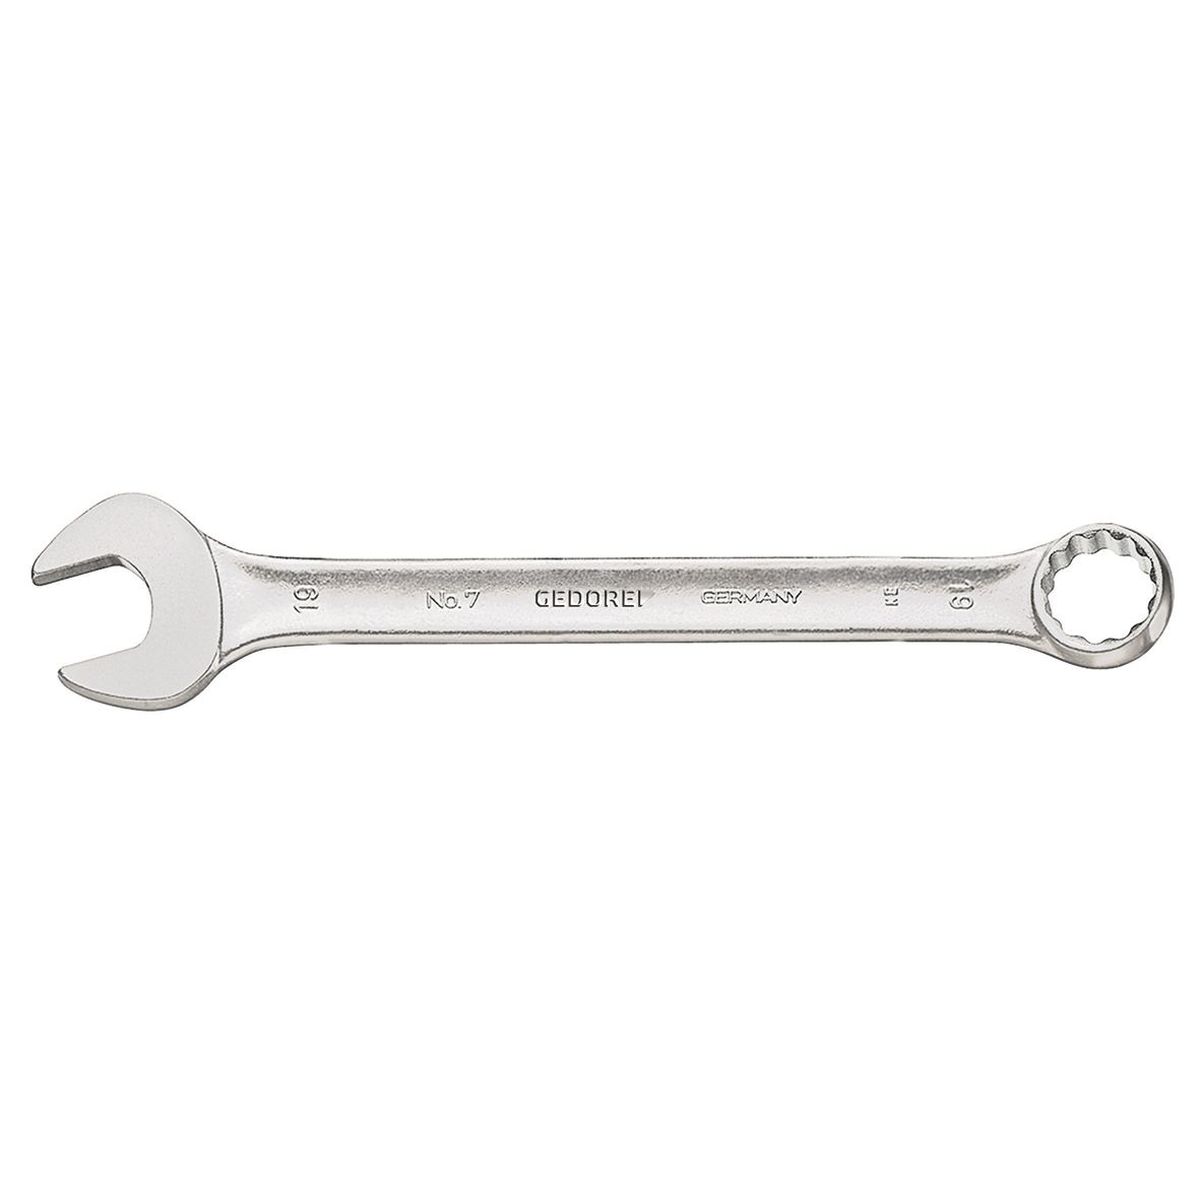 Combination spanner 11mm No.7 11 Gedore